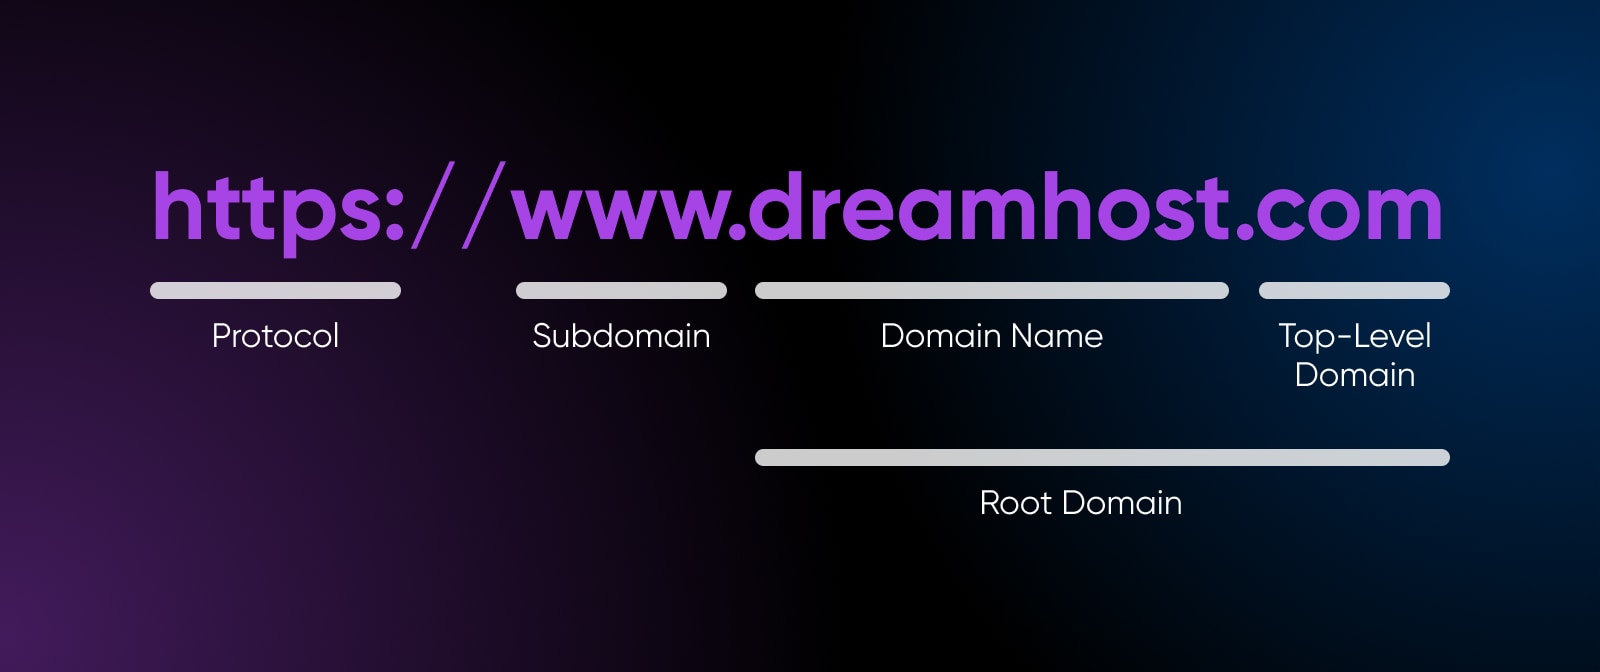 DreamHost SEO for Domains